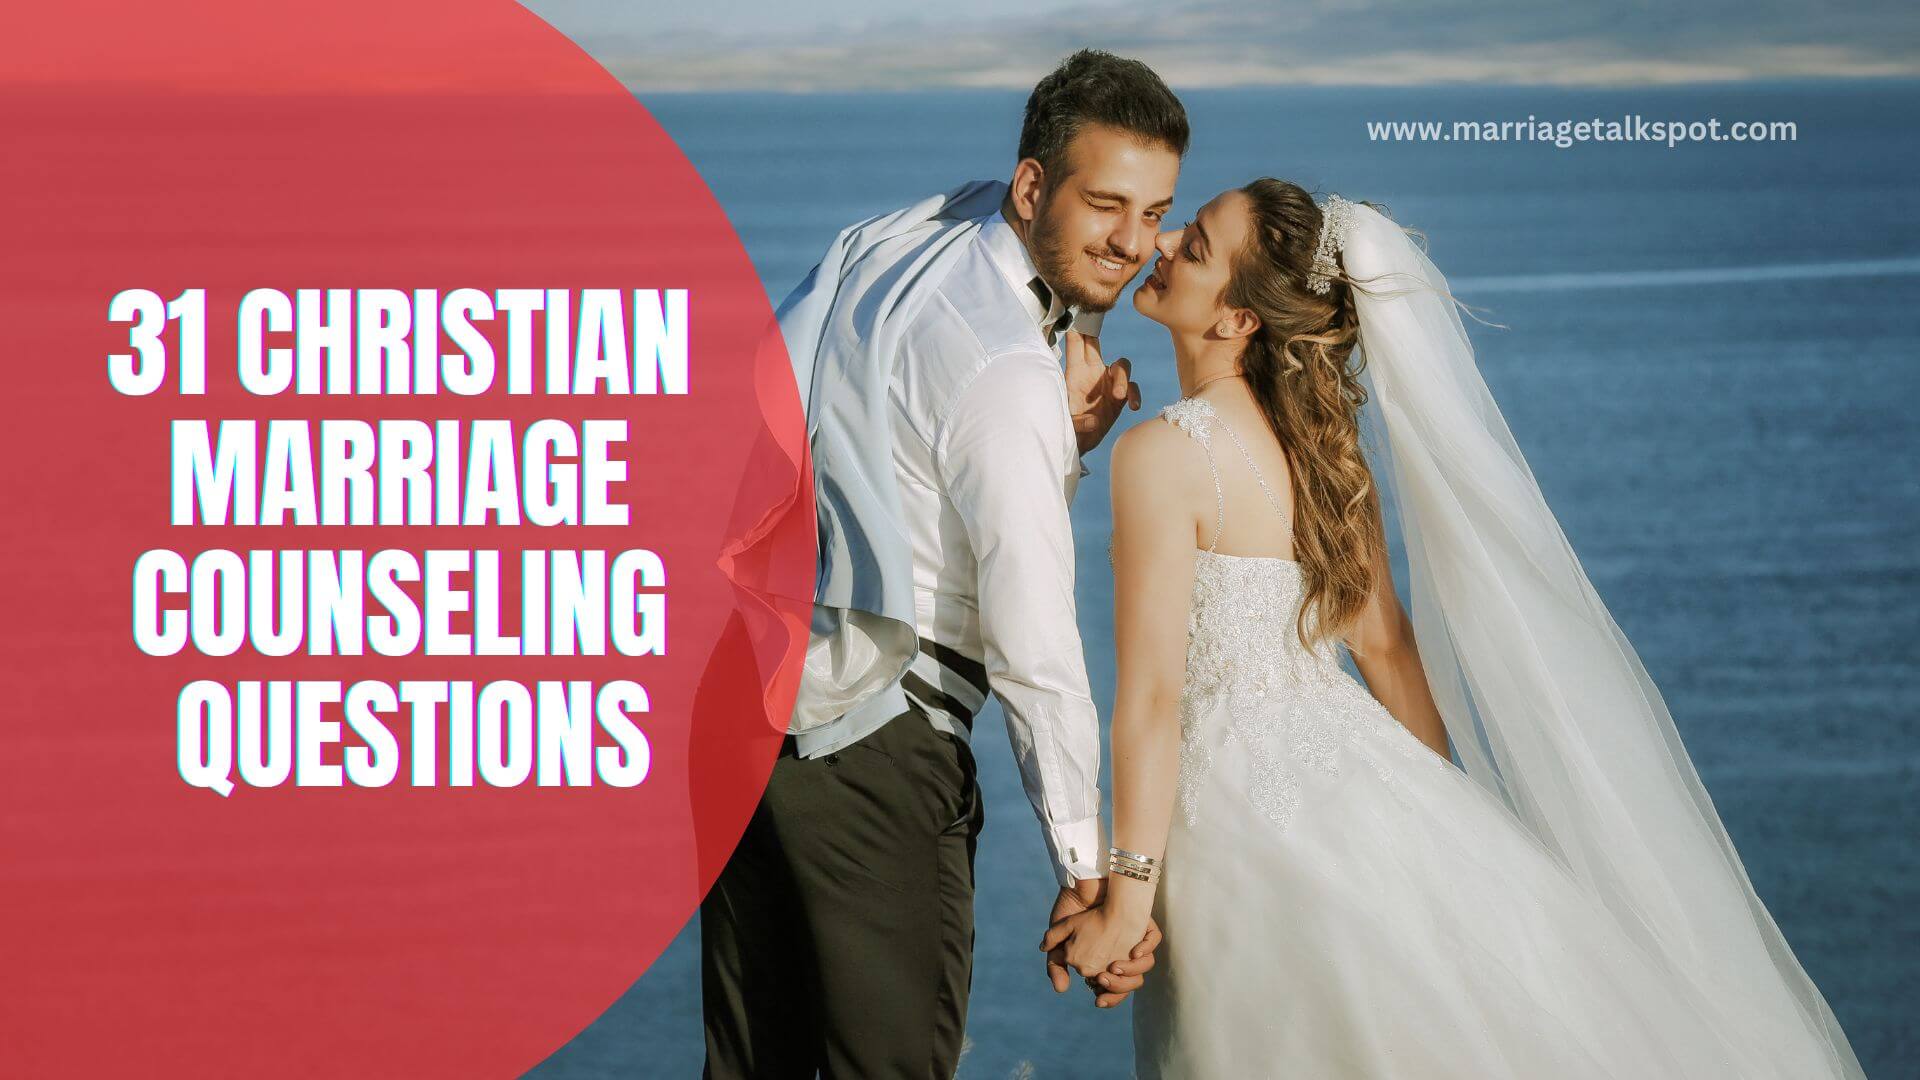 CHRISTIAN MARRIAGE COUNSELING QUESTIONS